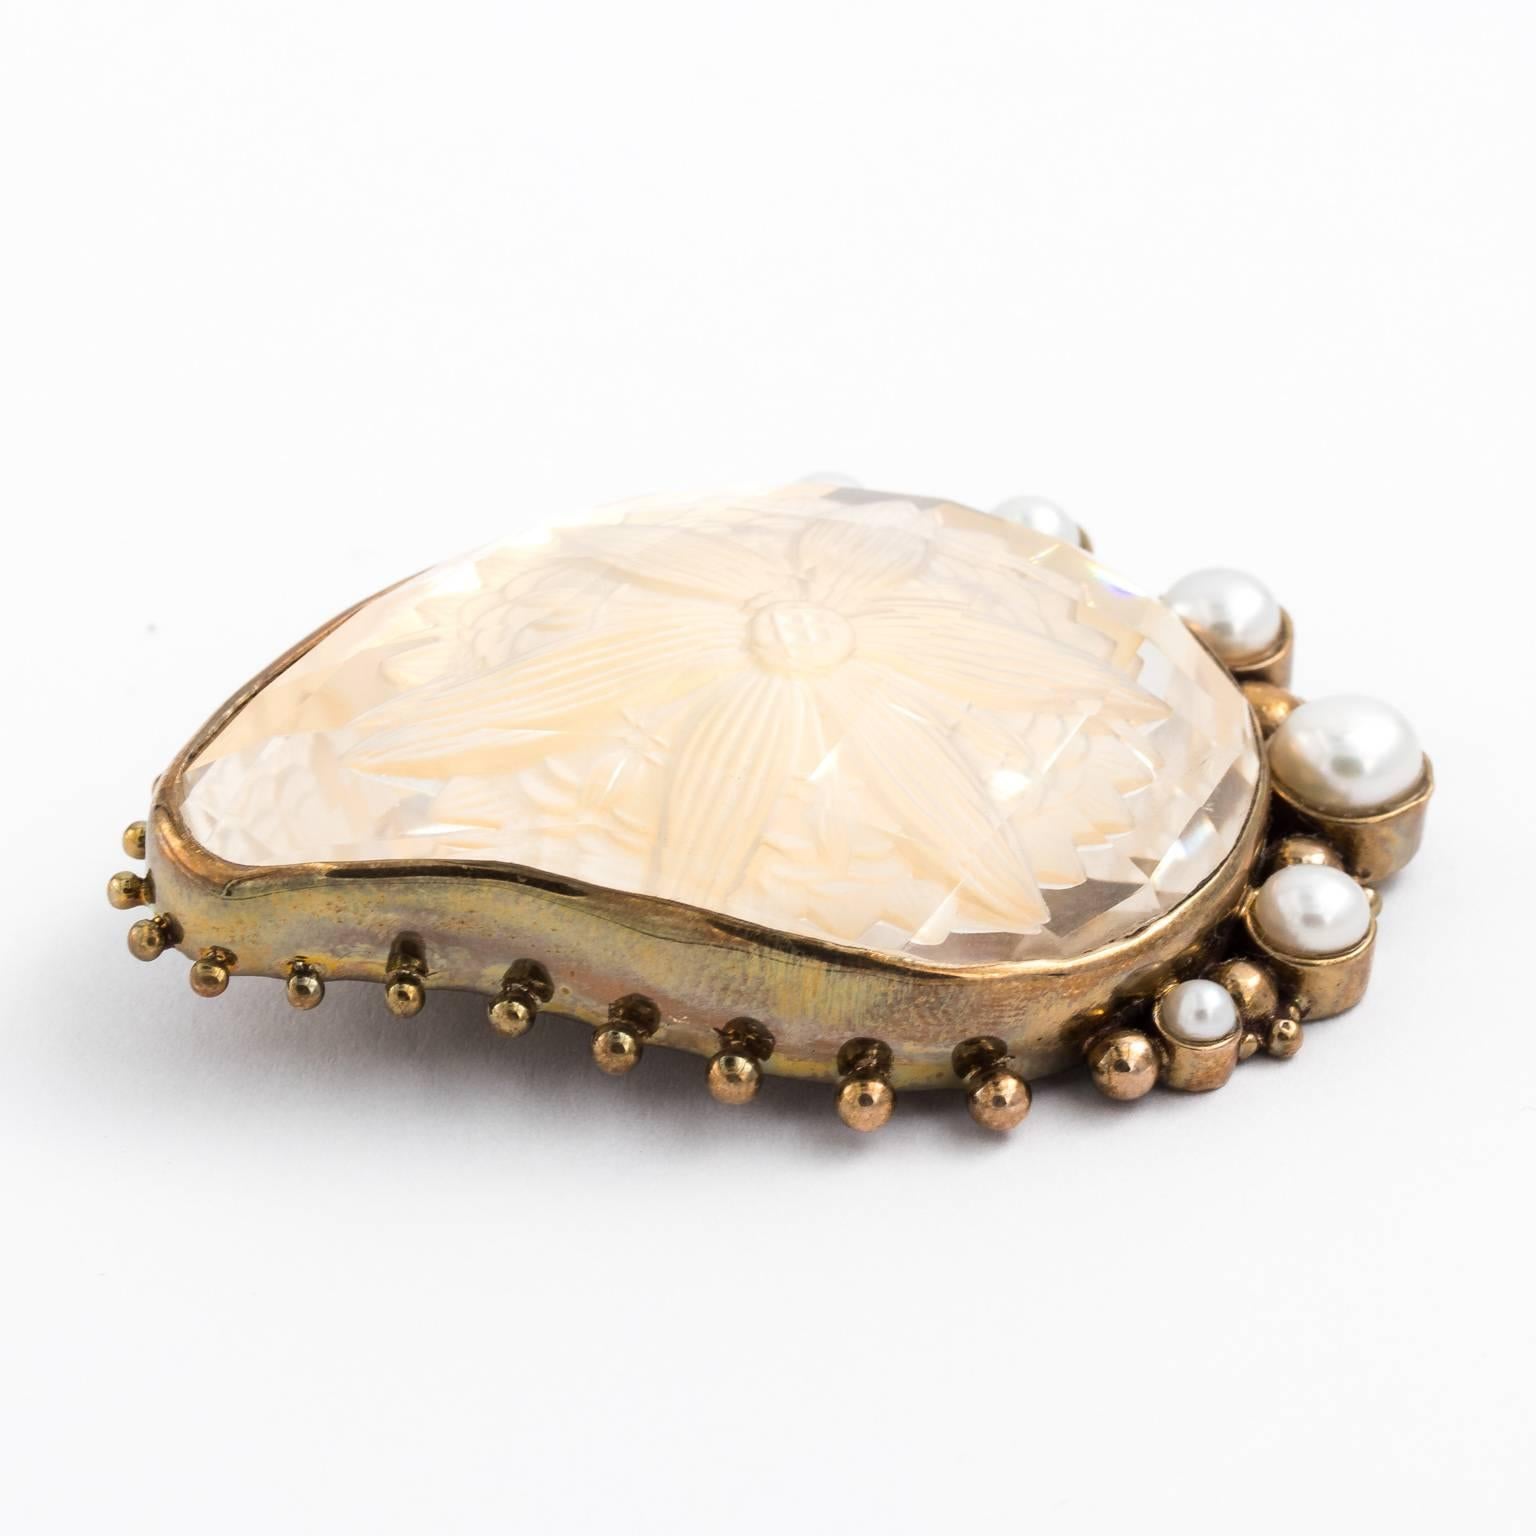 Circa 1970 Intaglio crystal and pearl brooch in a vintage bronze setting. Signed on the back by artist Stephan Dweck.